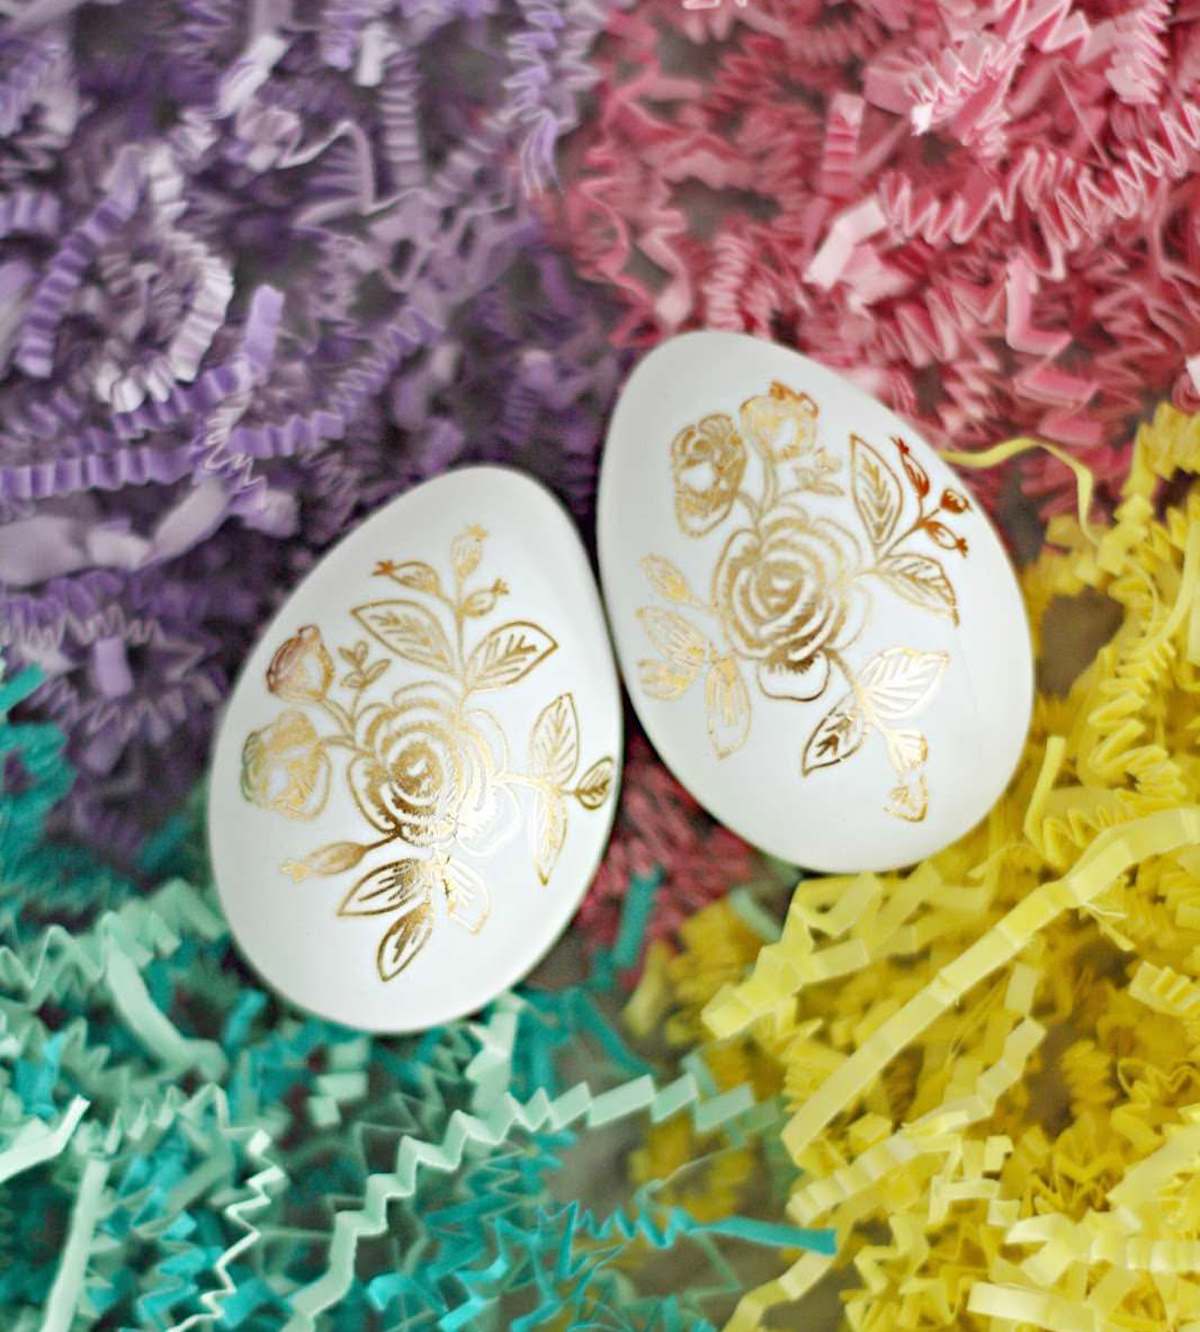 Tattoo Easter Eggs Are a Fun Holiday Craft - DIY Candy